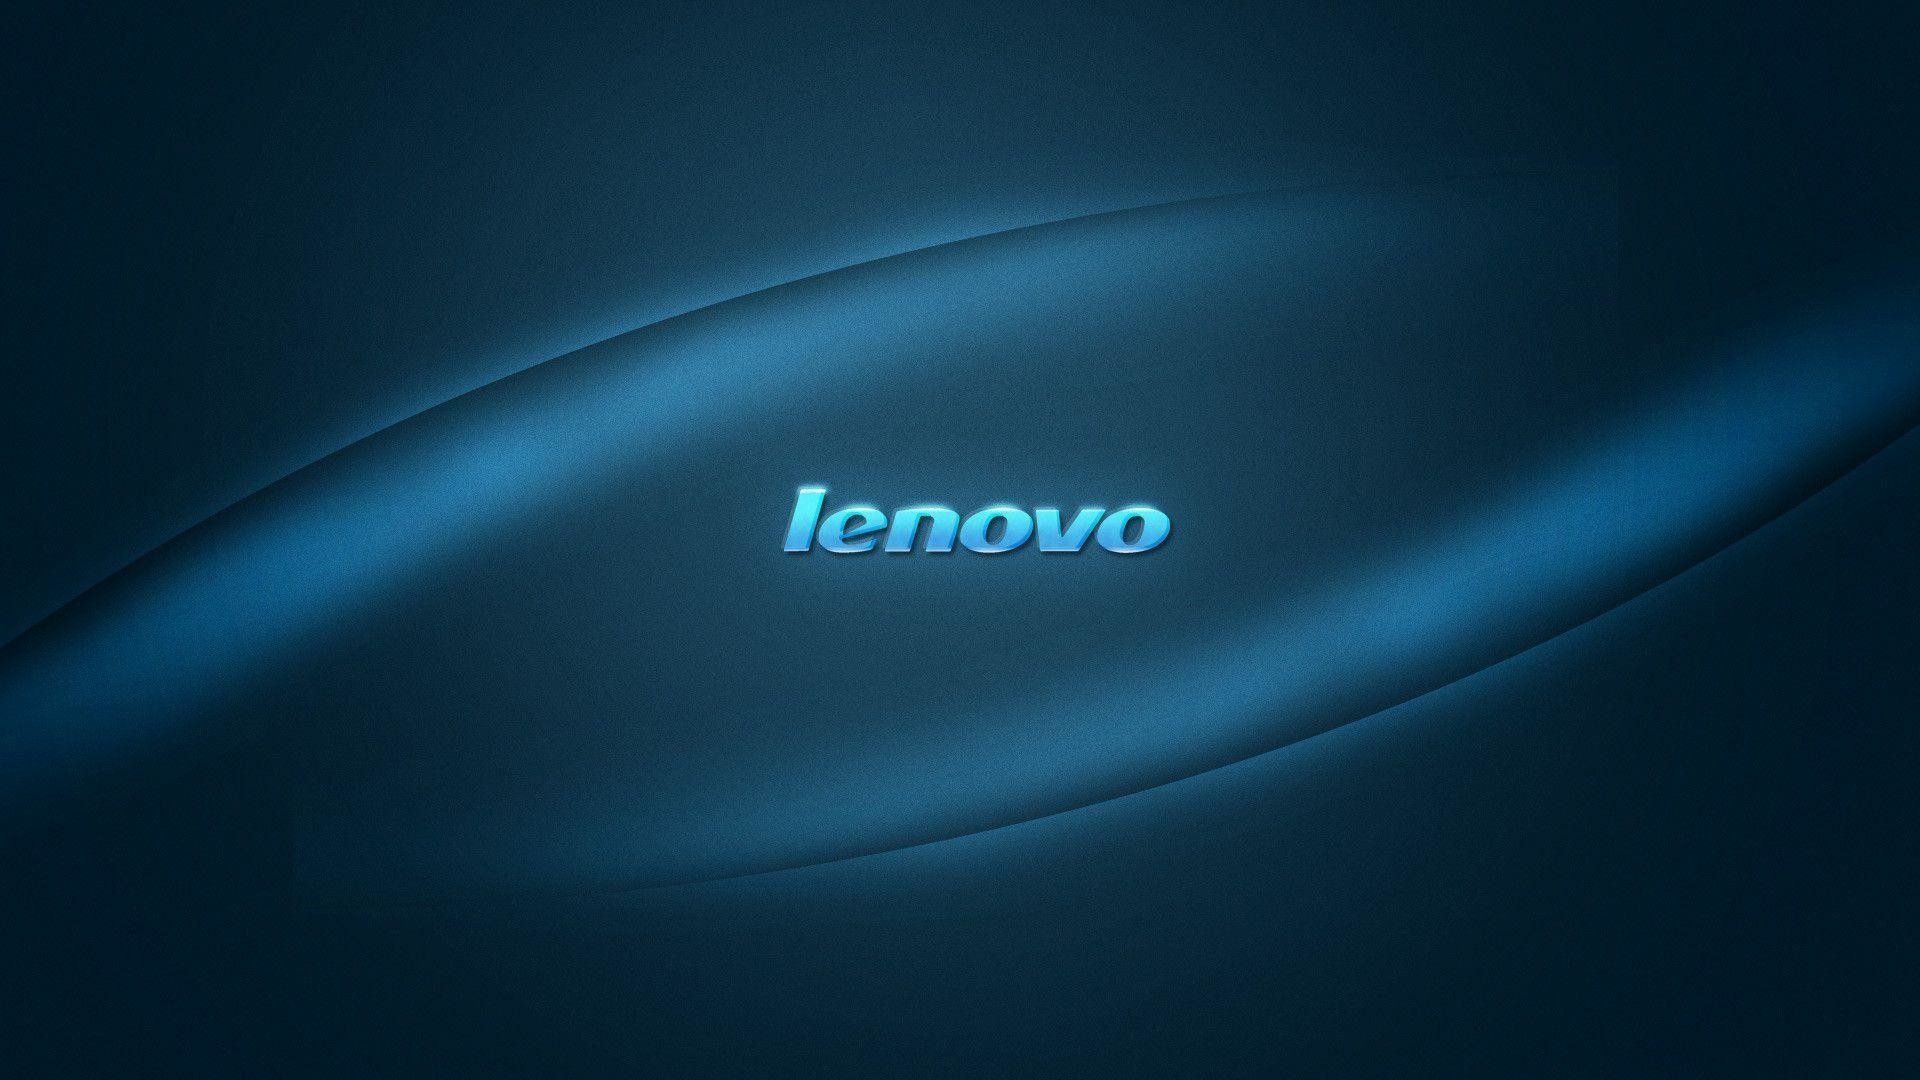 Lenovo Wallpaper Collection In HD For Android